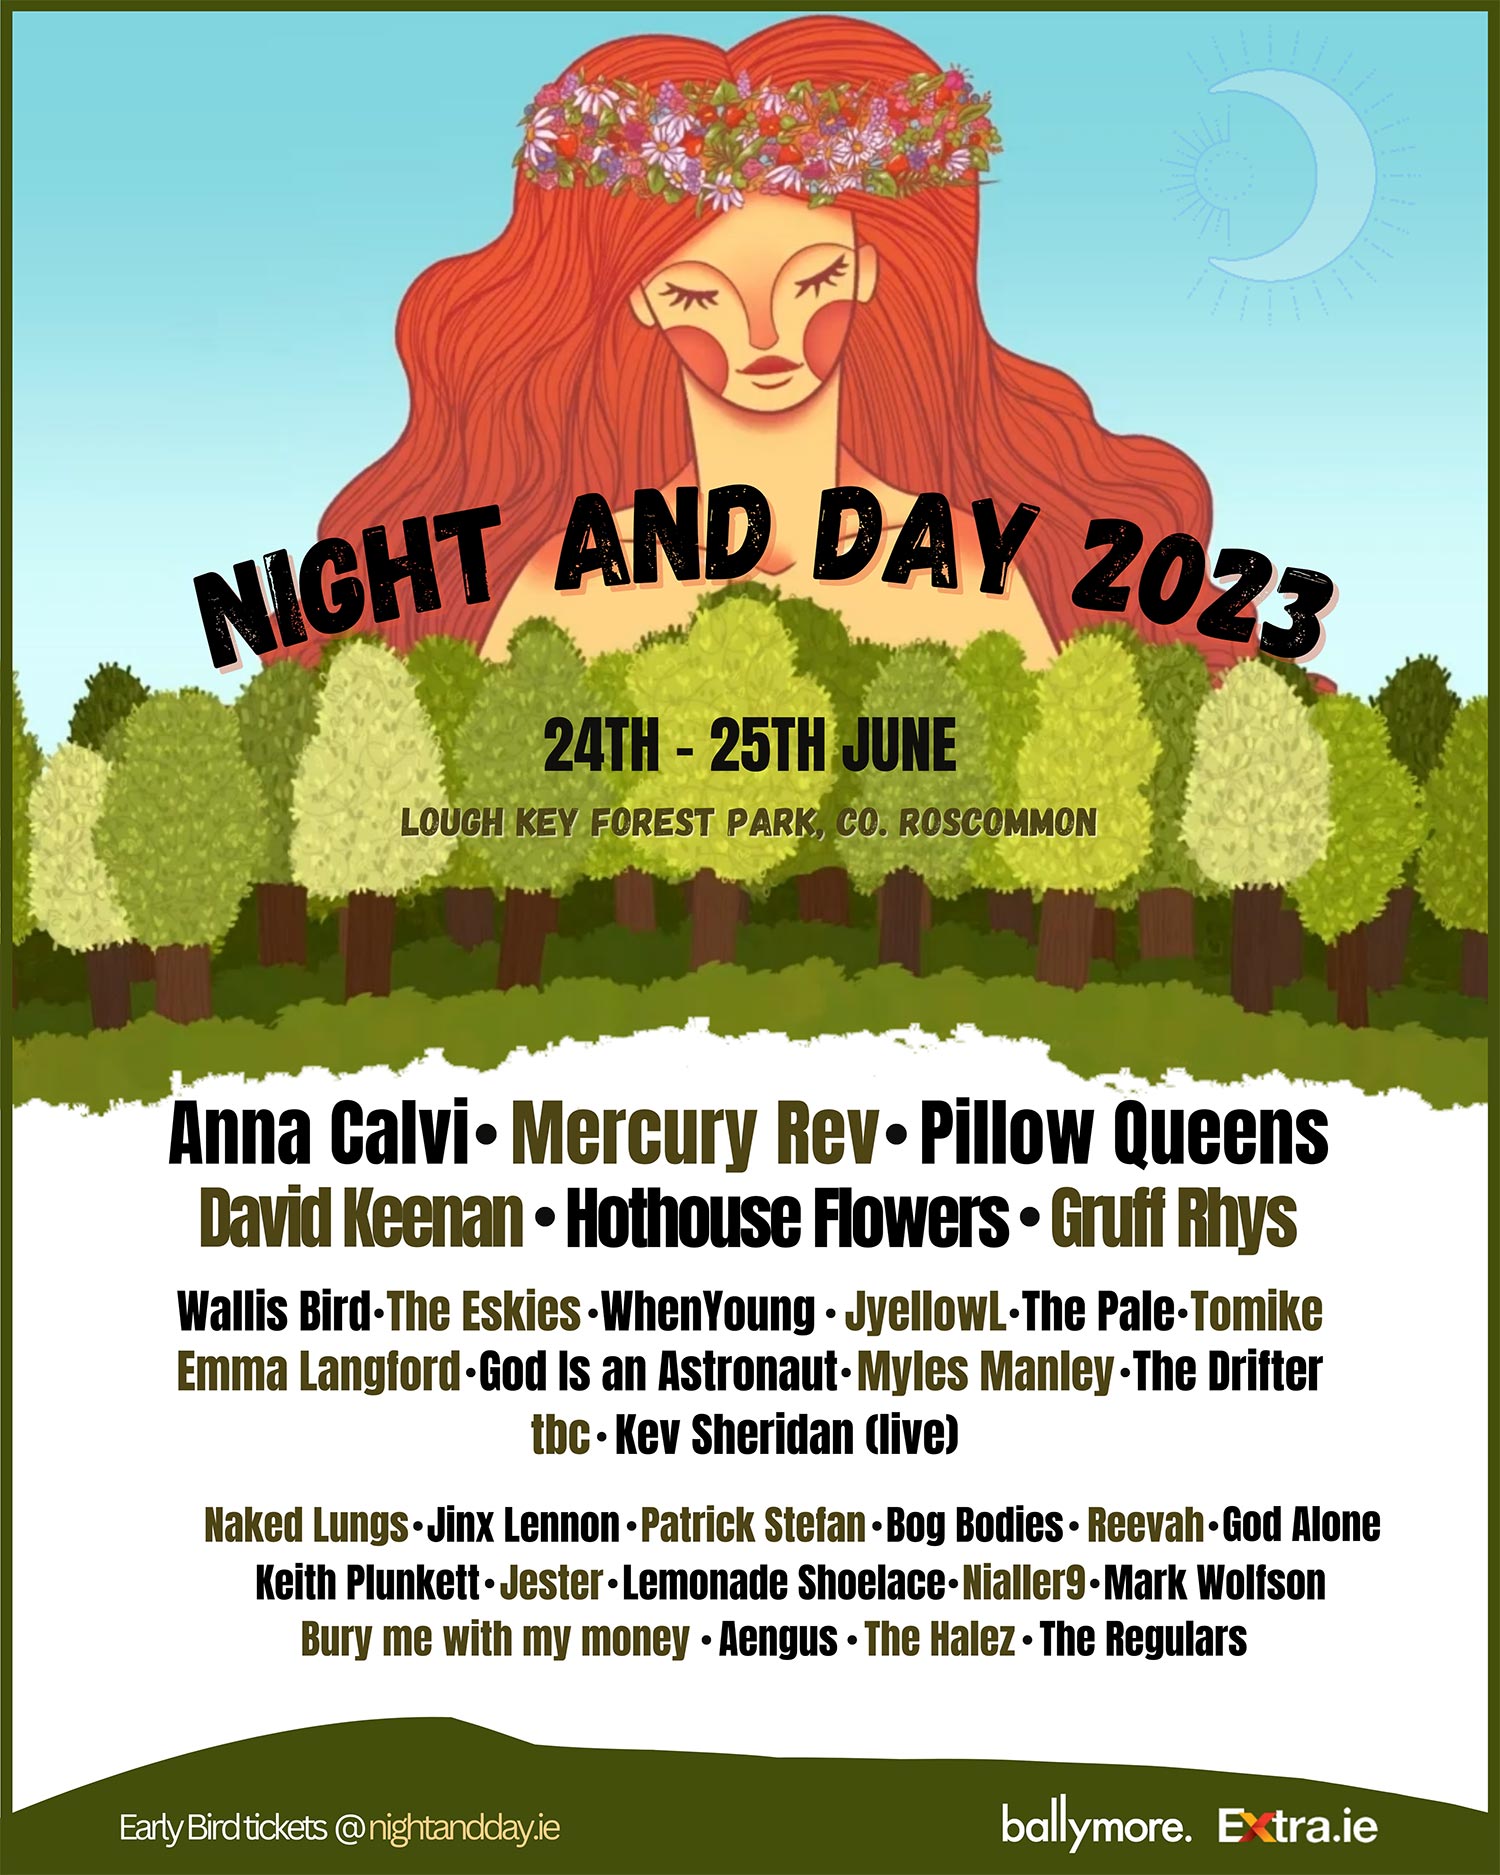 Mercury Rev play the Night and Day Festival